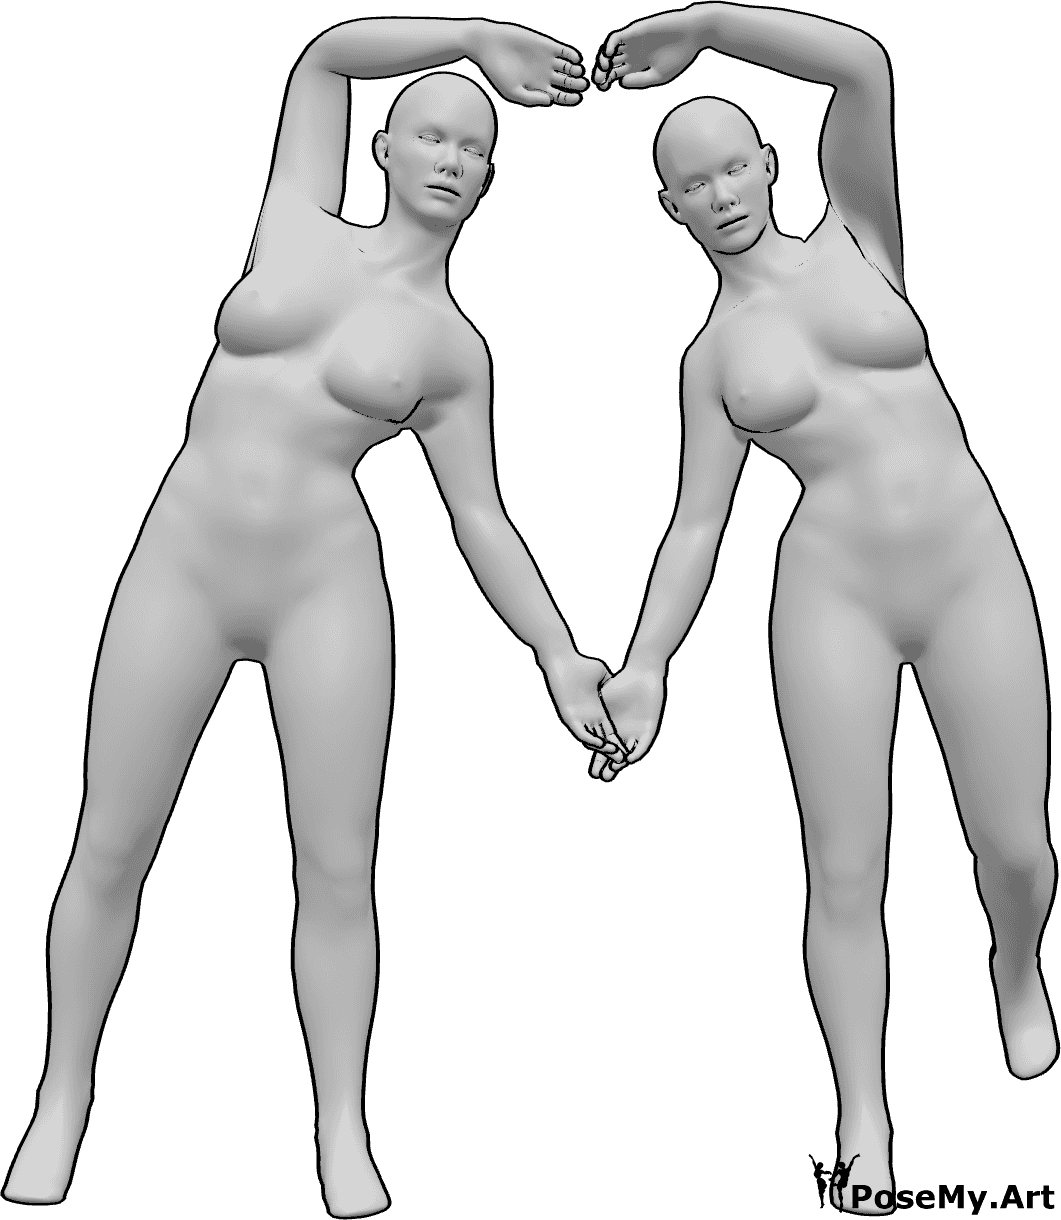 Pose Reference- Females heart pose - Two females are standing and making a heart with their arms